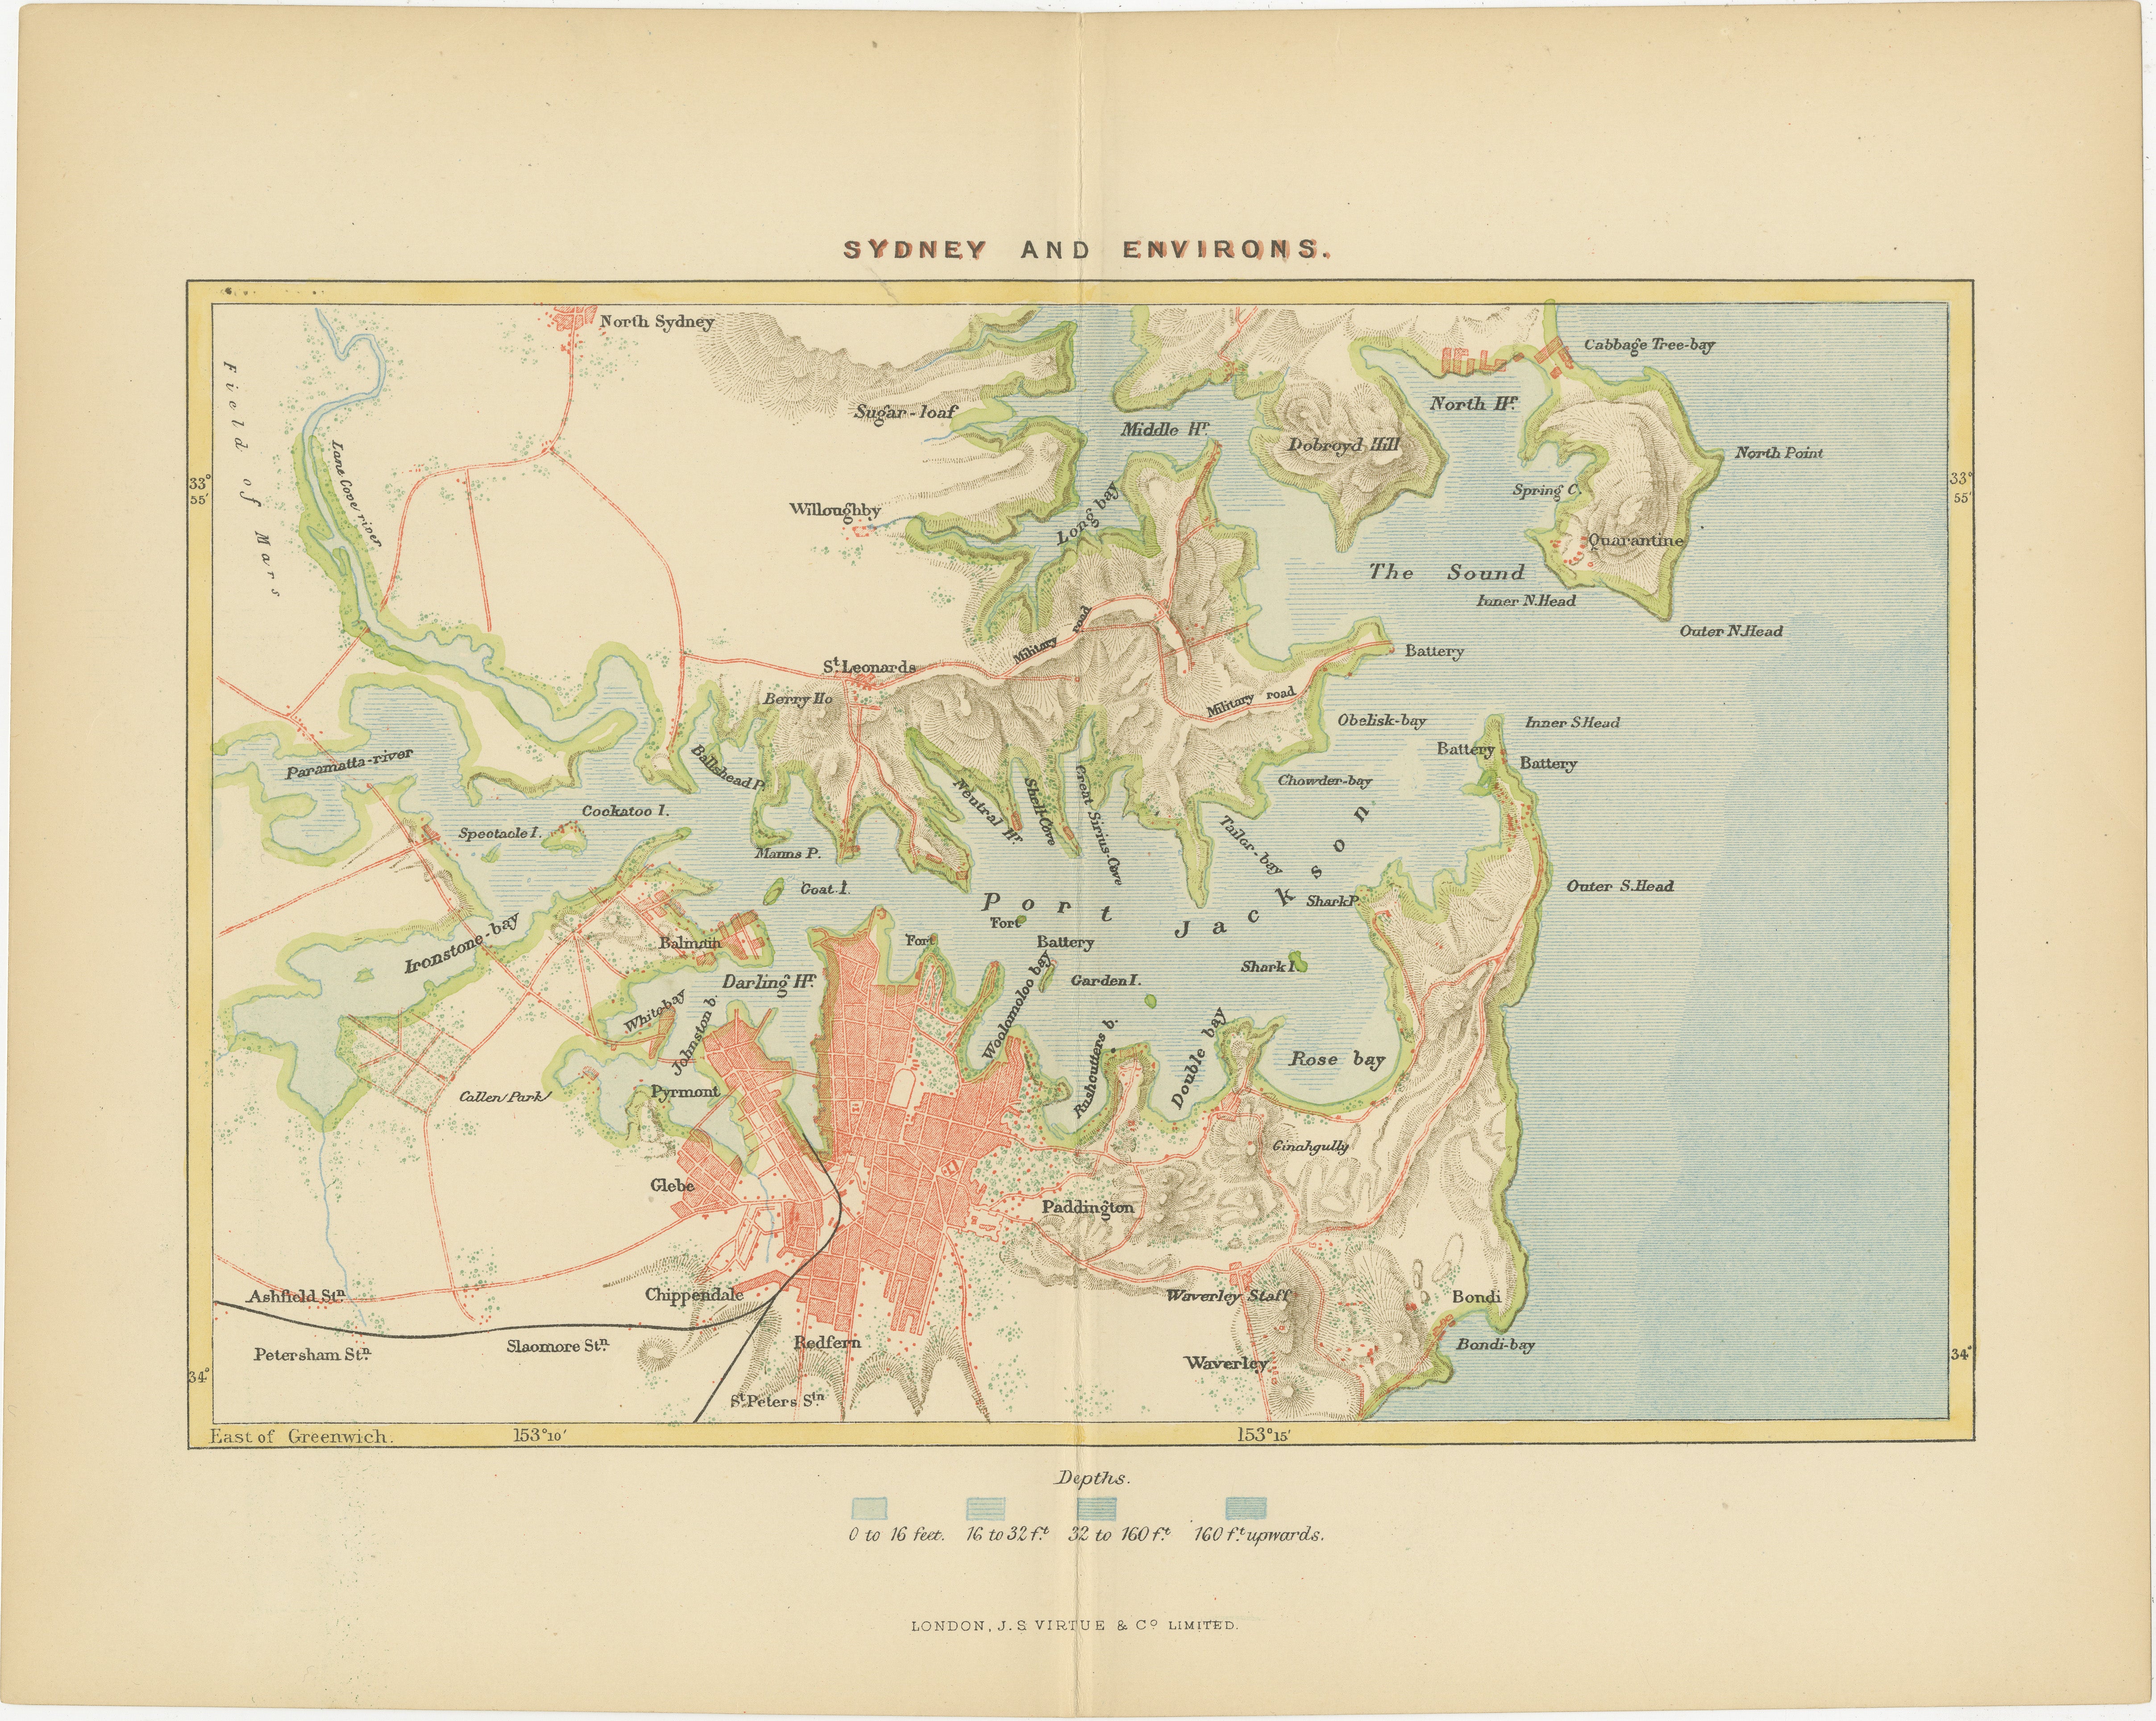 An antique map depicting Sydney and its surrounding areas, known as Port Jackson, dating from around 1889. It was produced by E. Reclus and is part of the 